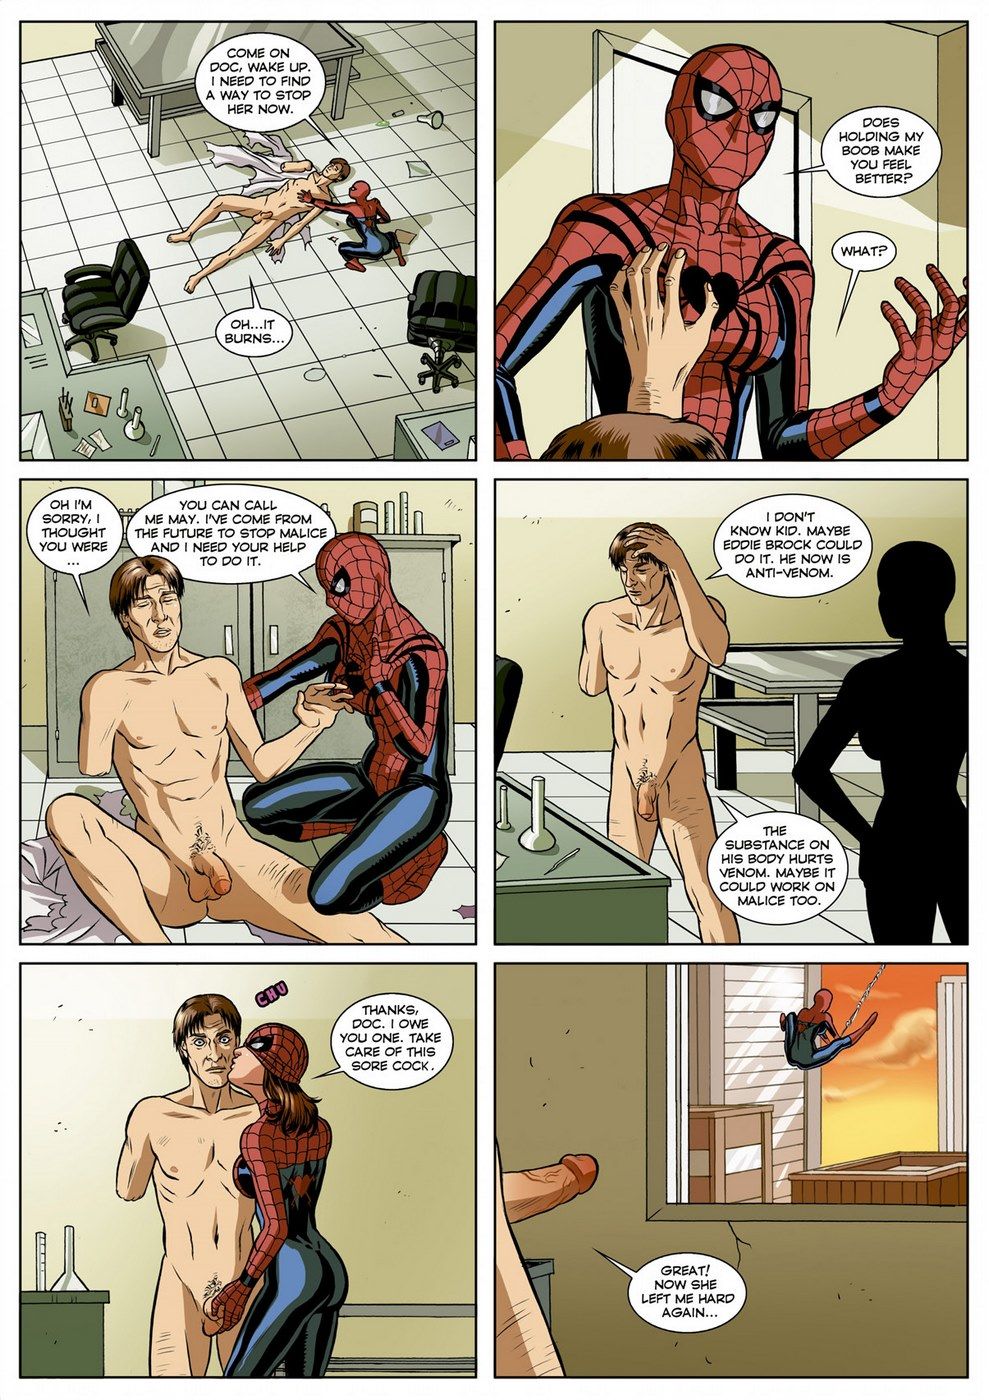 Spider-Man Sexual Symbiosis 1 page 19